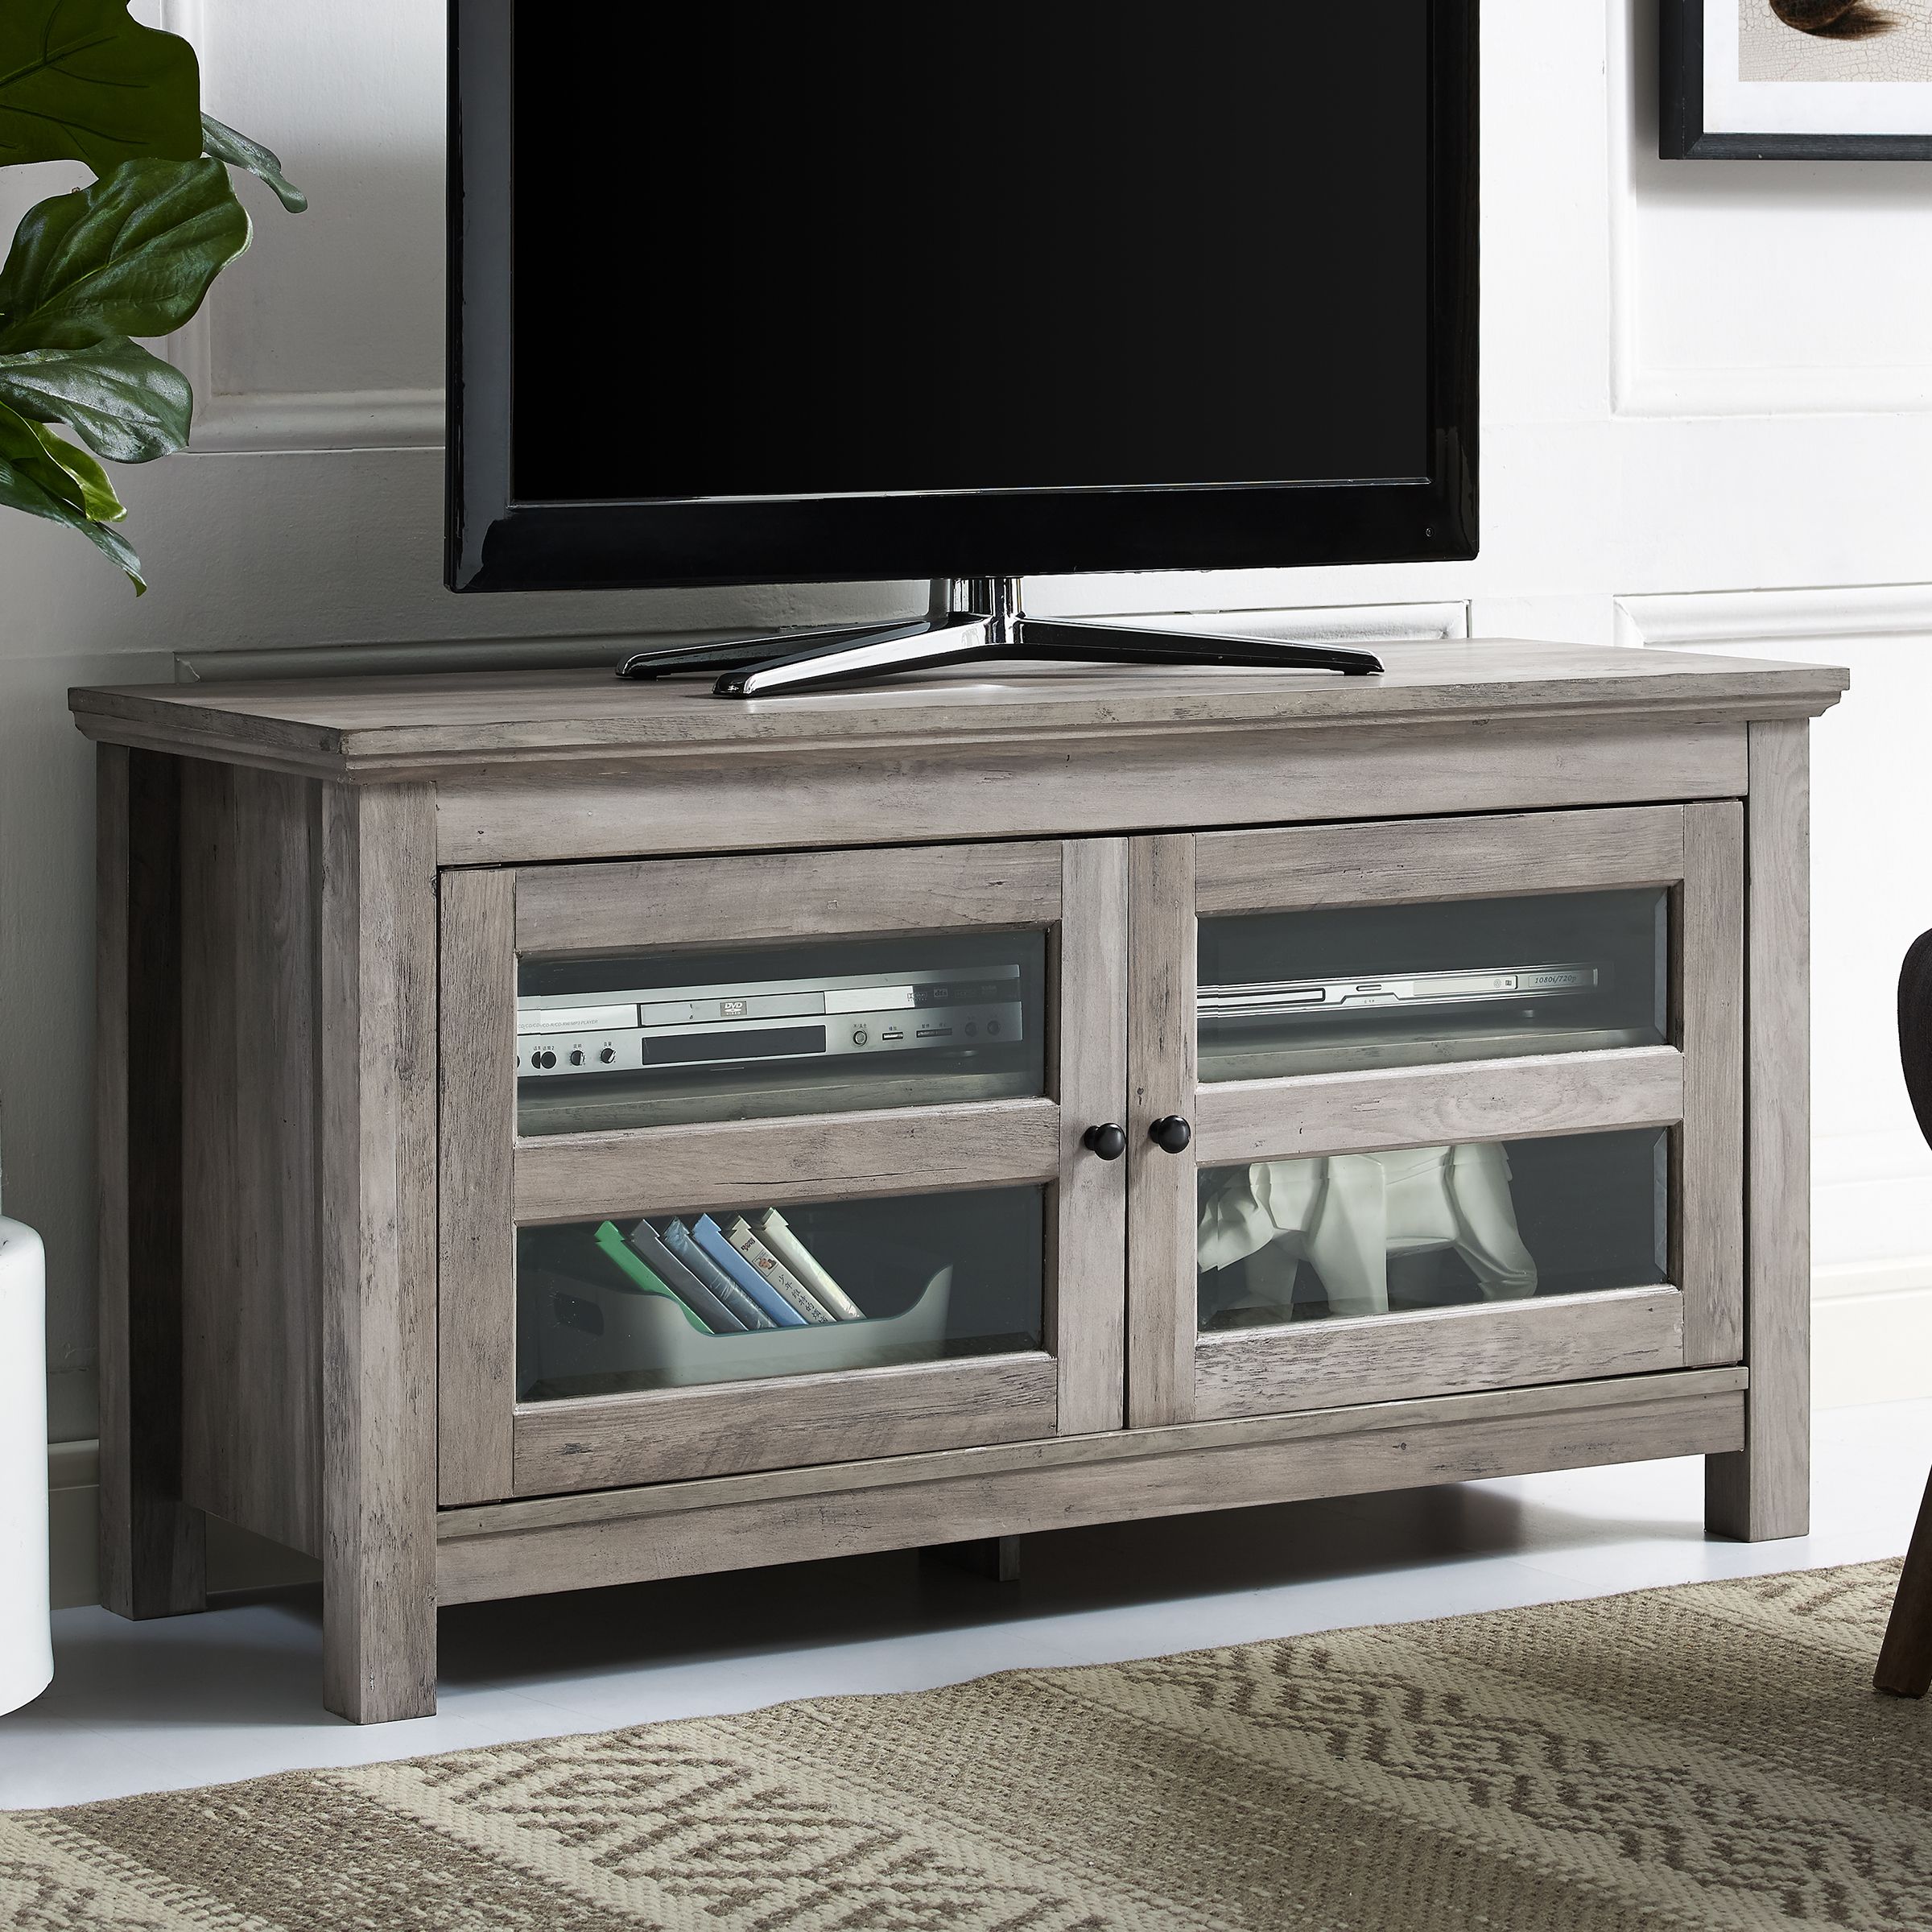 Manor Park 44" Wood Tv Media Stand Storage Console – Grey With Regard To Grey Wooden Tv Stands (View 4 of 15)